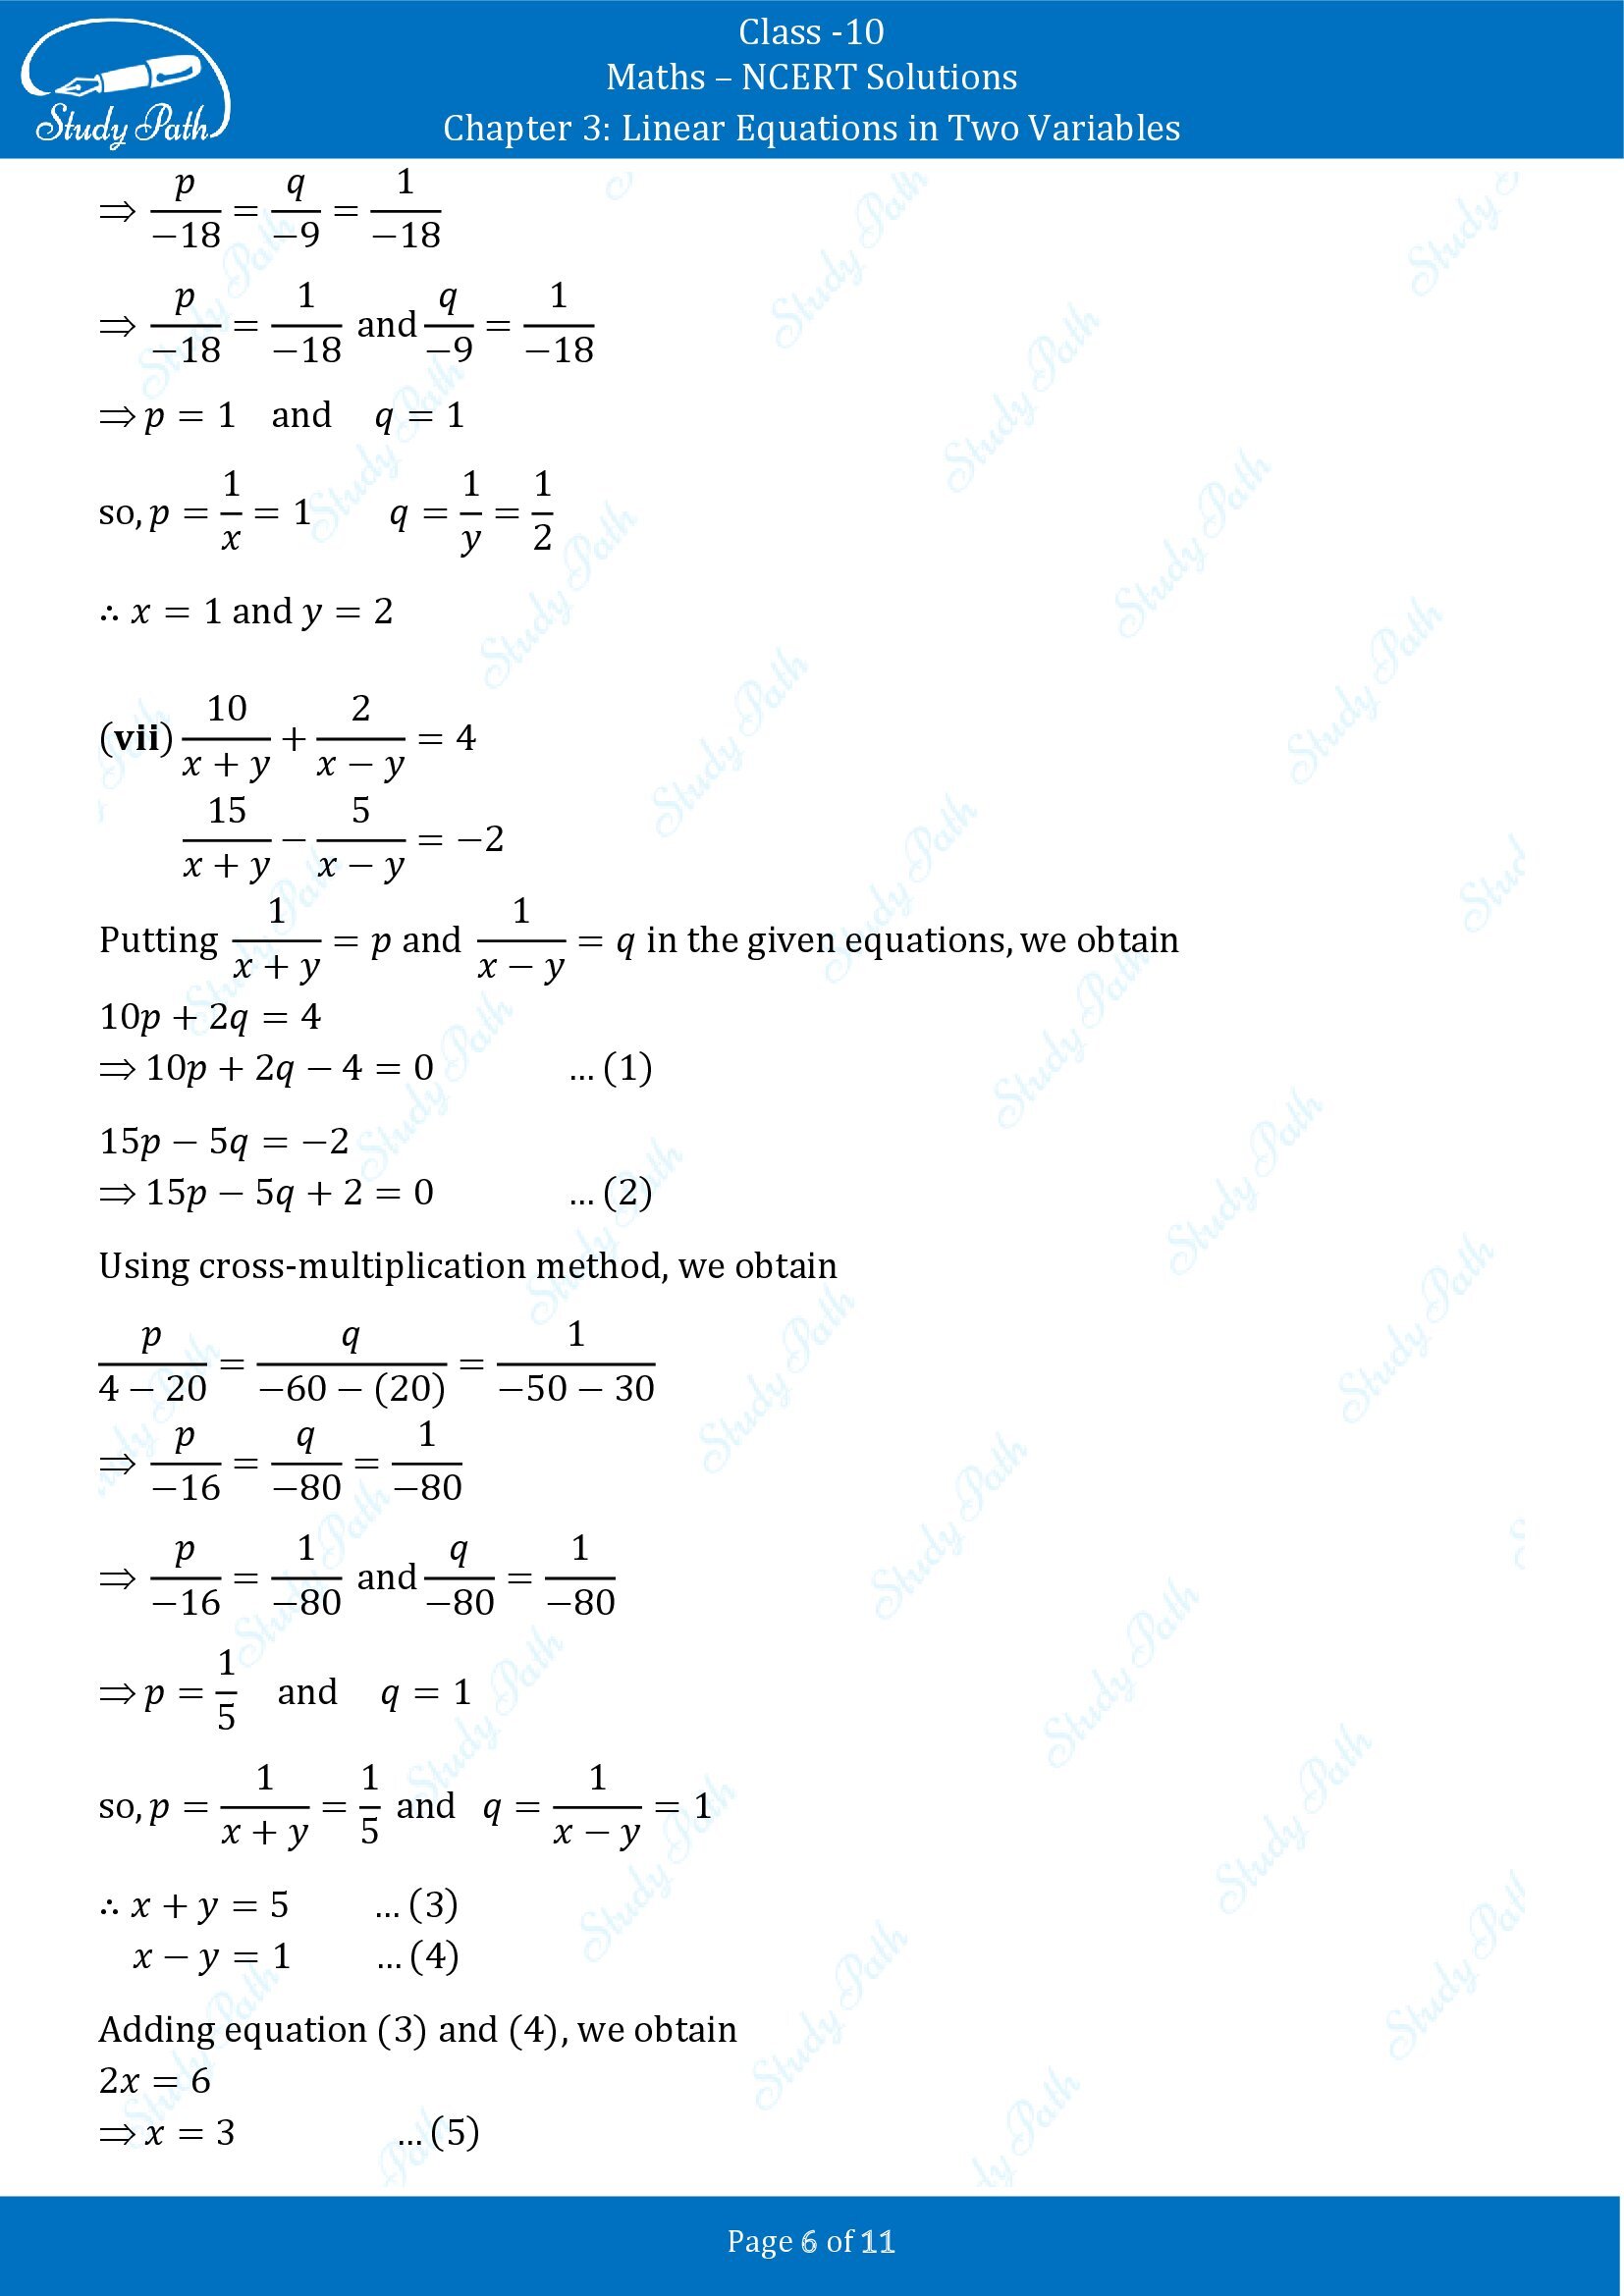 NCERT Solutions for Class 10 Maths Chapter 3 Linear Equations in Two Variables Exercise 3.6 00006